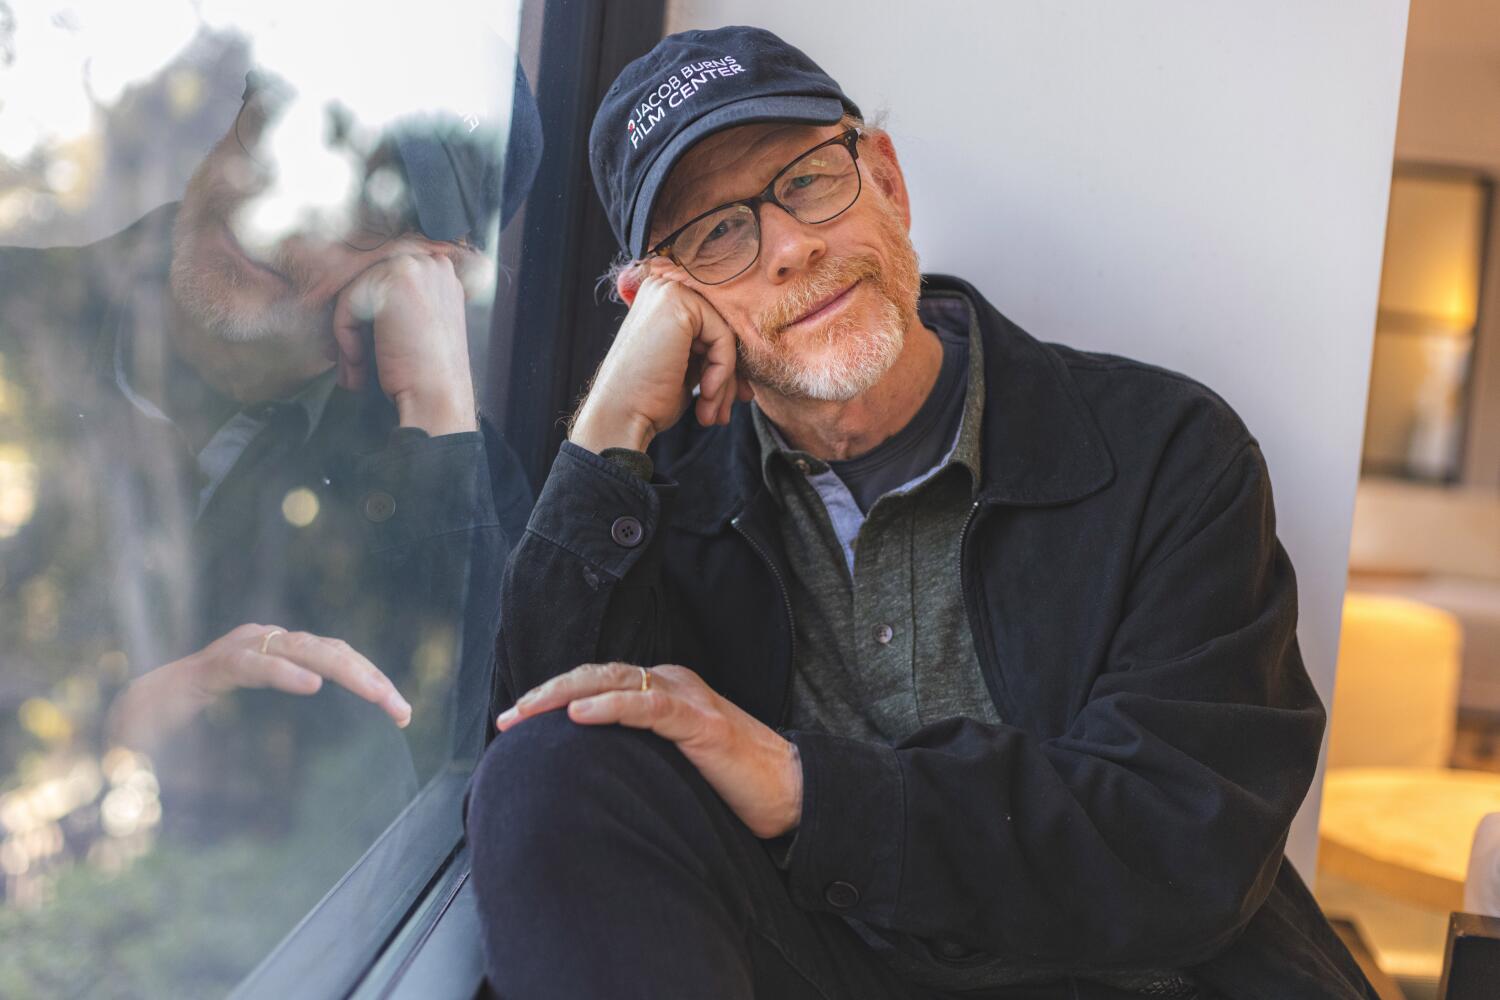 Ron Howard explores the creative world of Jim Henson, his Muppets and life's connections